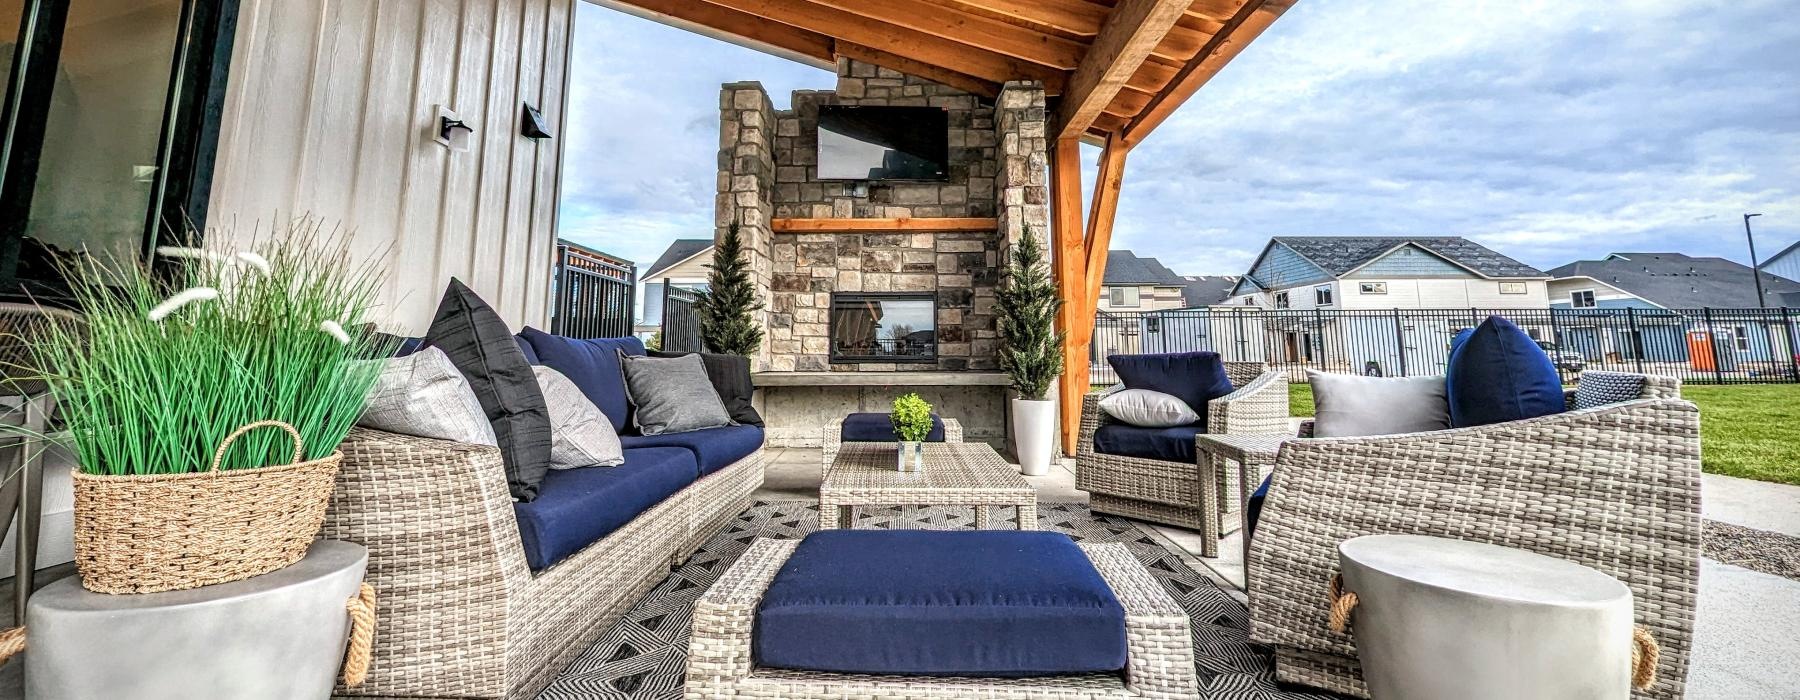 a patio with a fireplace and a patio with a stone patio